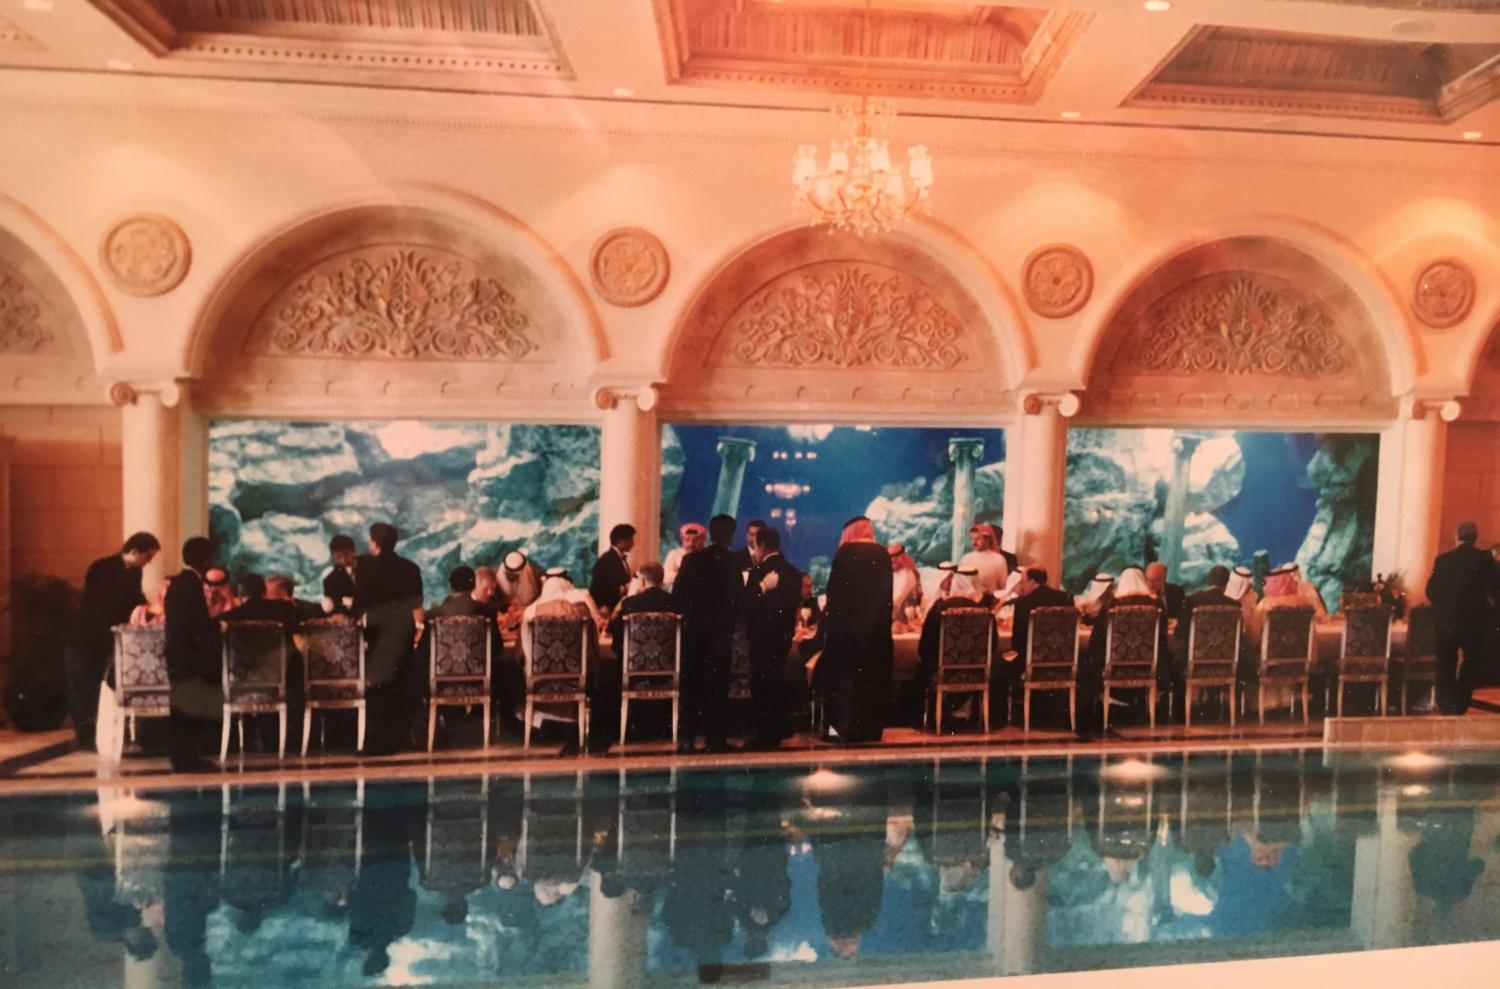 The banquet hall in the royal palace in Jidda, Saudi Arabia with the aquarium in 1998. Photo provided by Bruce Riedel.